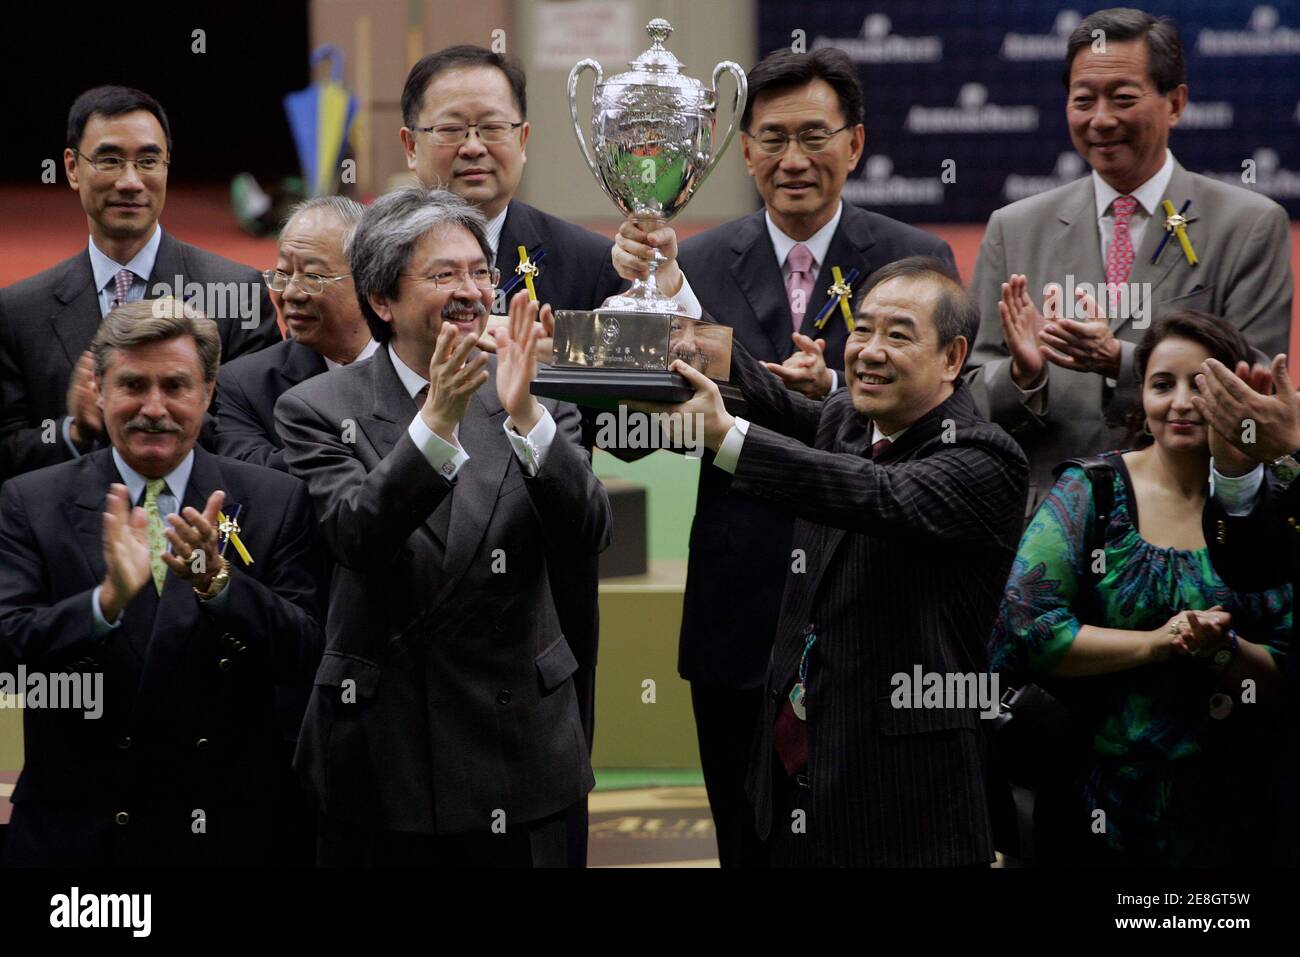 Horse owner Tam Wing-Kun holds the trophy next to Hong Kong's Financial Secretary John Tsang after Sight Winner won the Champions Mile horse race at Shatin racecourse in Hong Kong April 26, 2009.     REUTERS/Tyrone Siu    (CHINA SPORT EQUESTRIANISM) Stock Photo